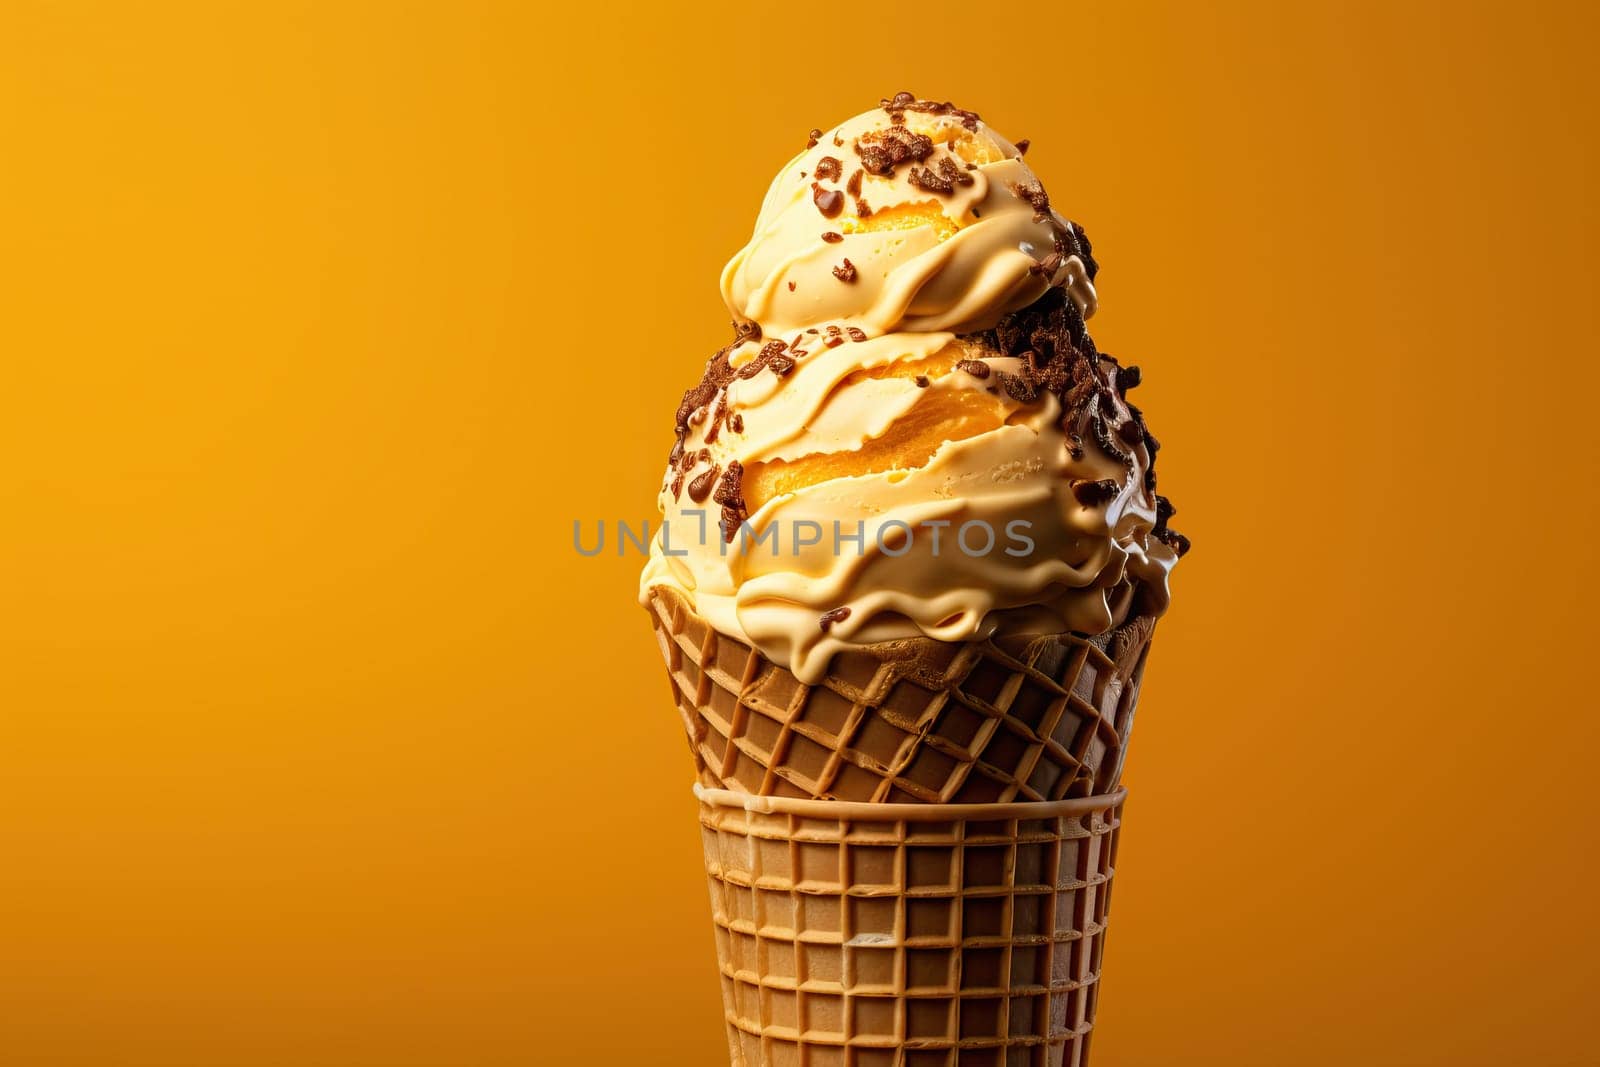 A cone of banana ice cream on a yellow background sprinkled with chocolate close-up.